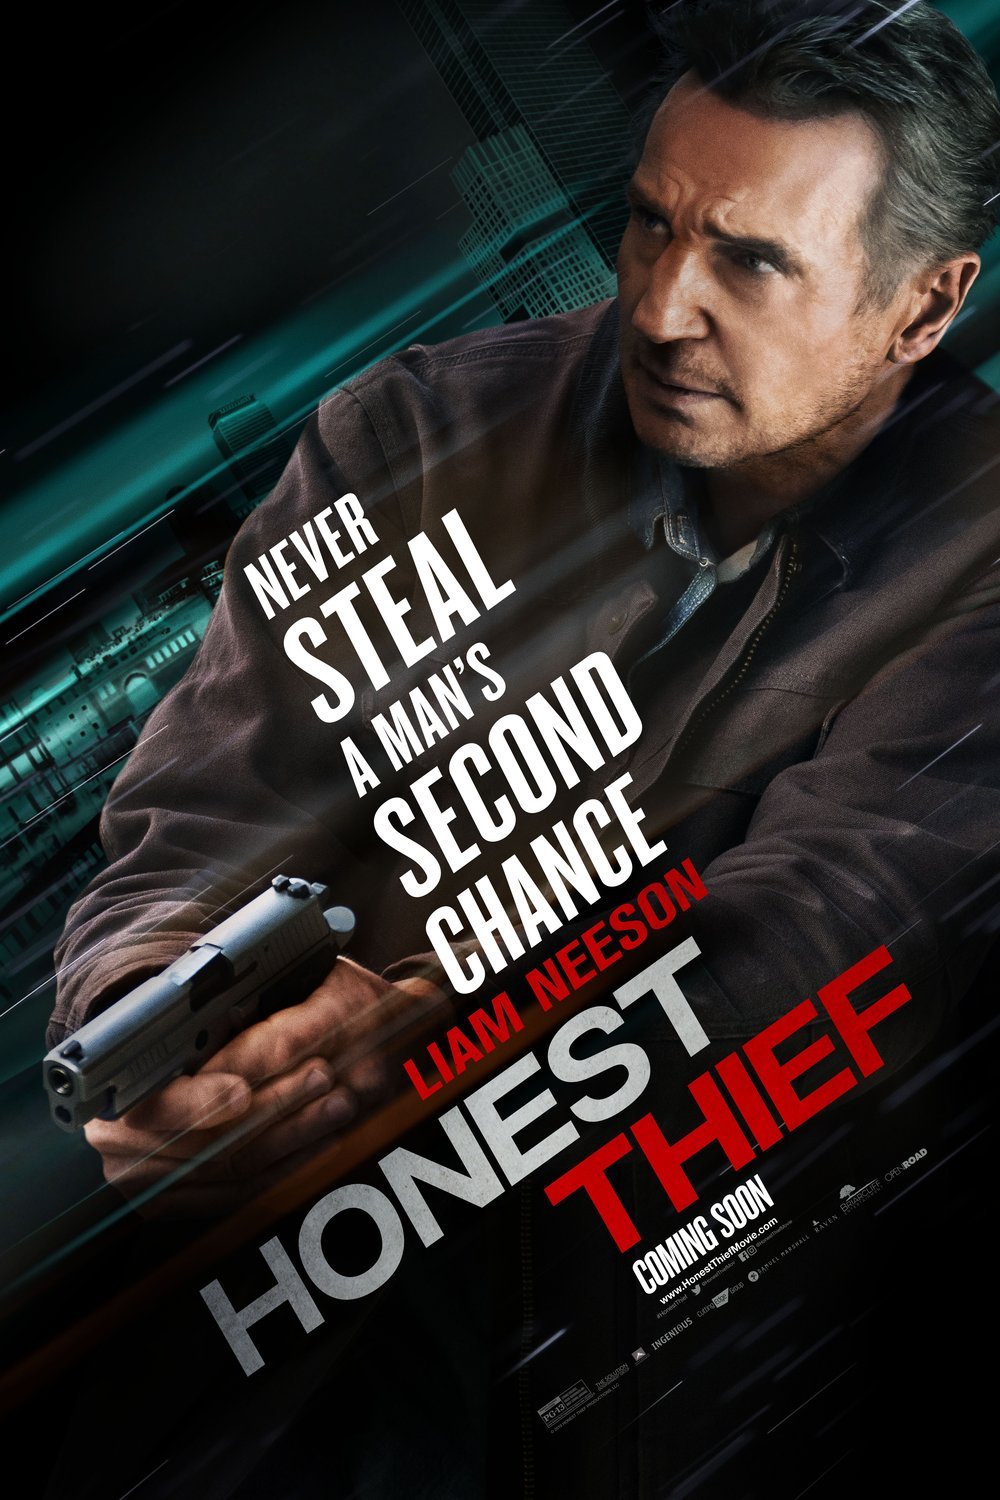 Poster of the movie Honest Thief